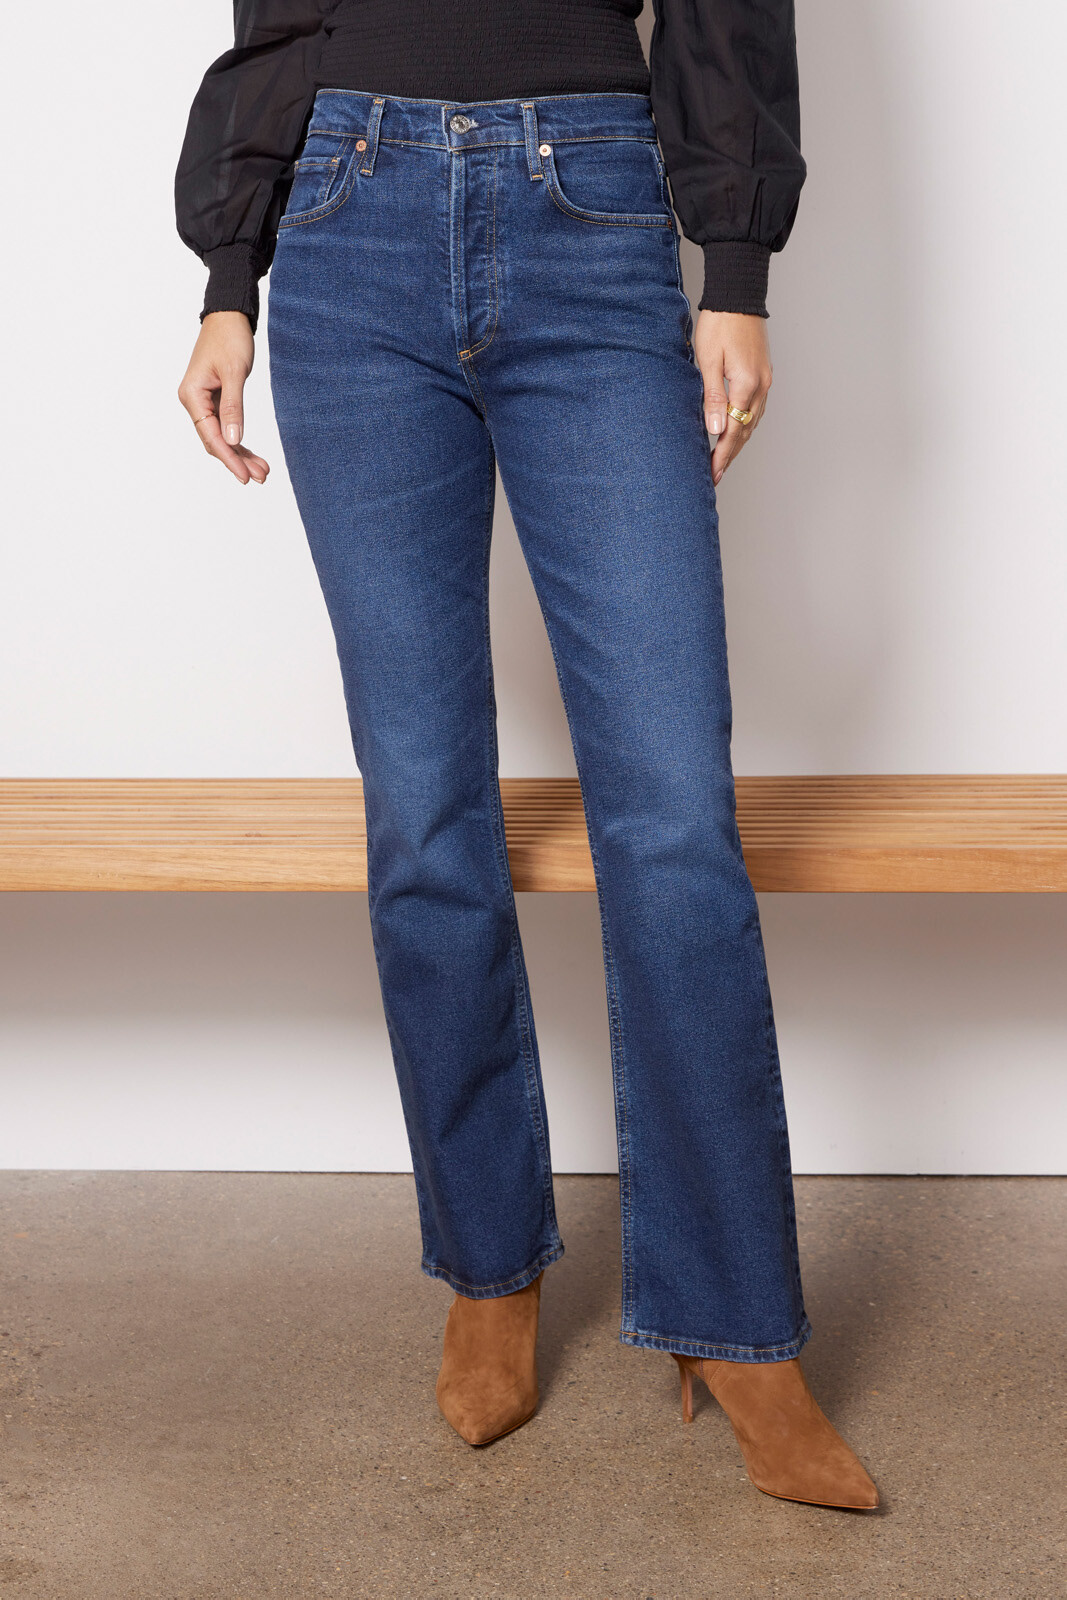 CITIZENS OF HUMANITY Libby High Rise Vintage Bootcut Jean | EVEREVE